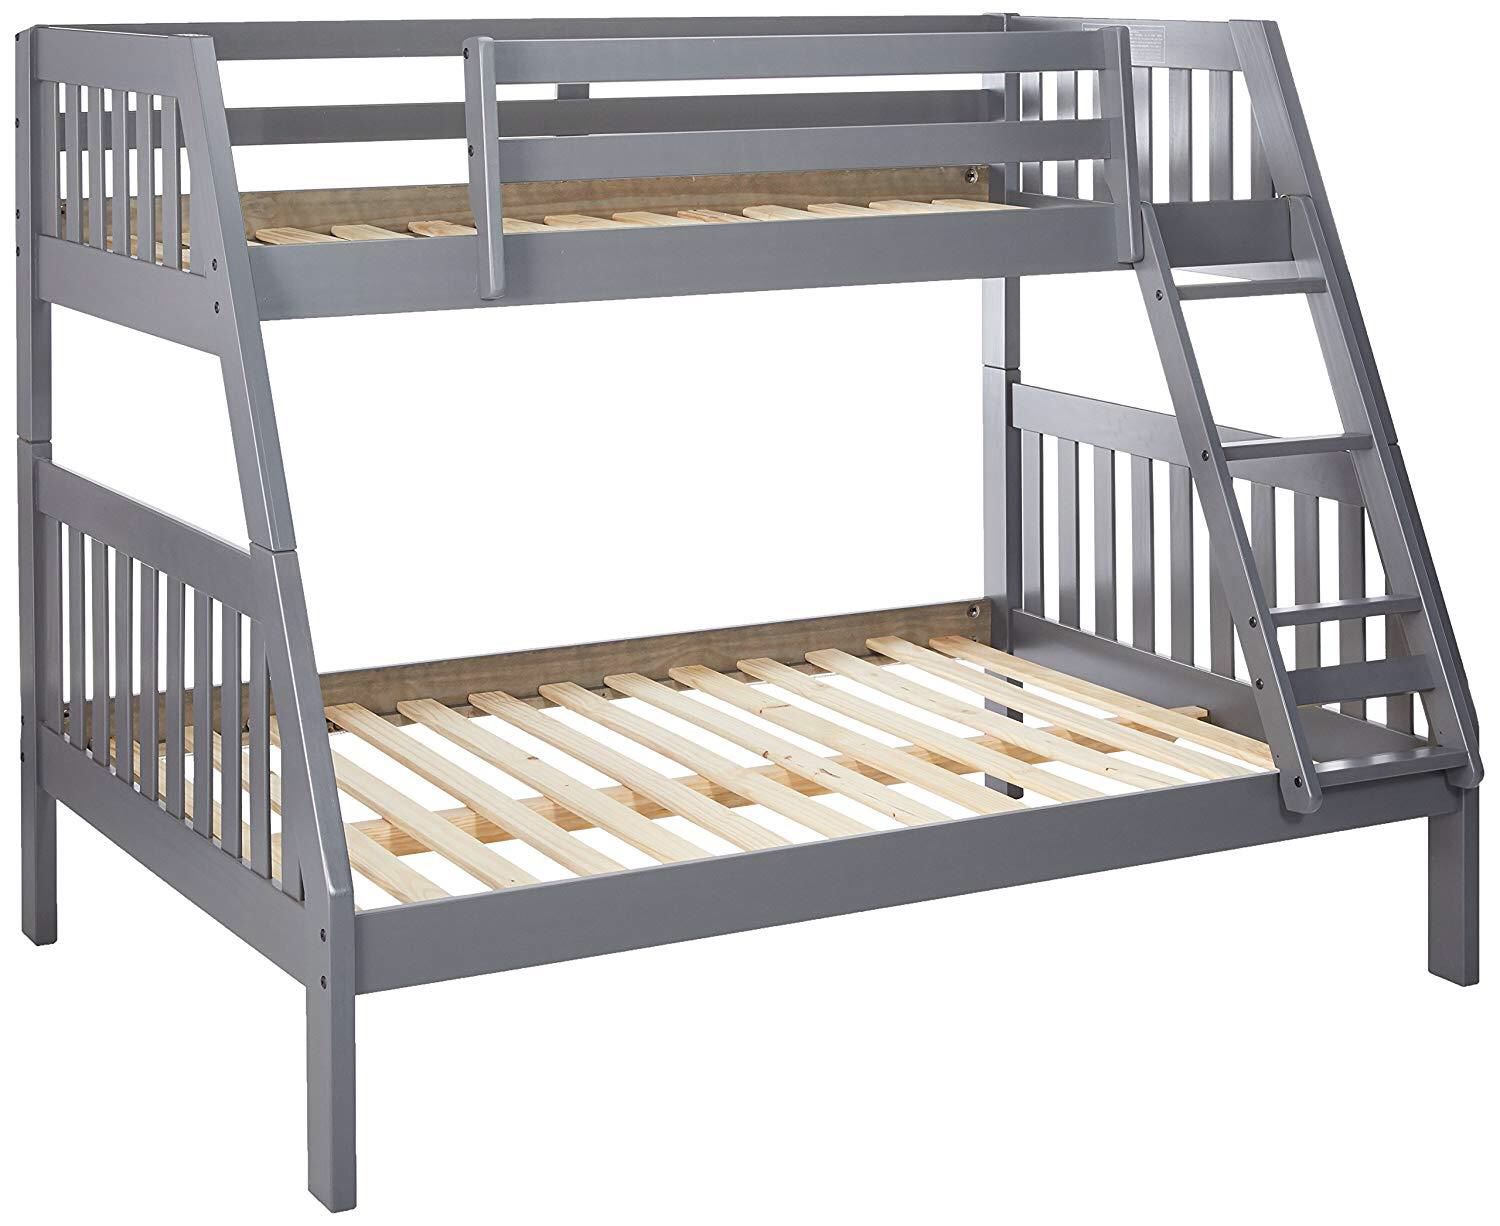 ☀️🥵🤑 1018 SUMMER SALE CLEARANCE☀️🥵🤑 Mission Dark Twin/Full Bunk Bed JULY 2020 SALE FAST DELIVERY CHARLOTTE AREA 🚚🔥🔥***buysmart and SAVE 💰!!!!